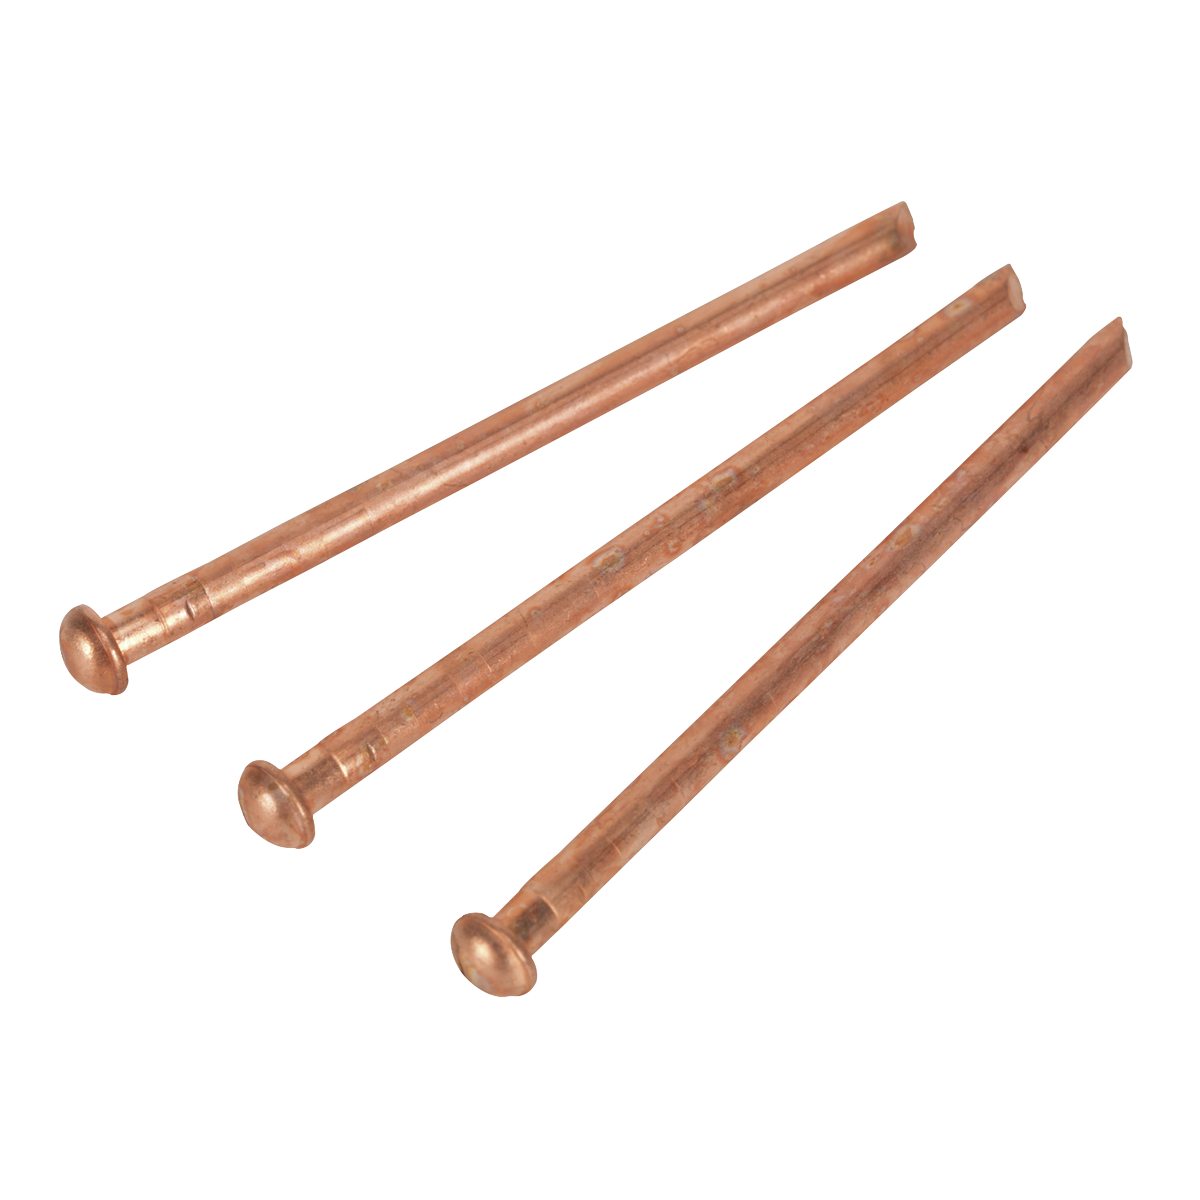 Stud Welding Nail 2.5 x 50mm - Pack of 200 - PS/000250/200 - Farming Parts